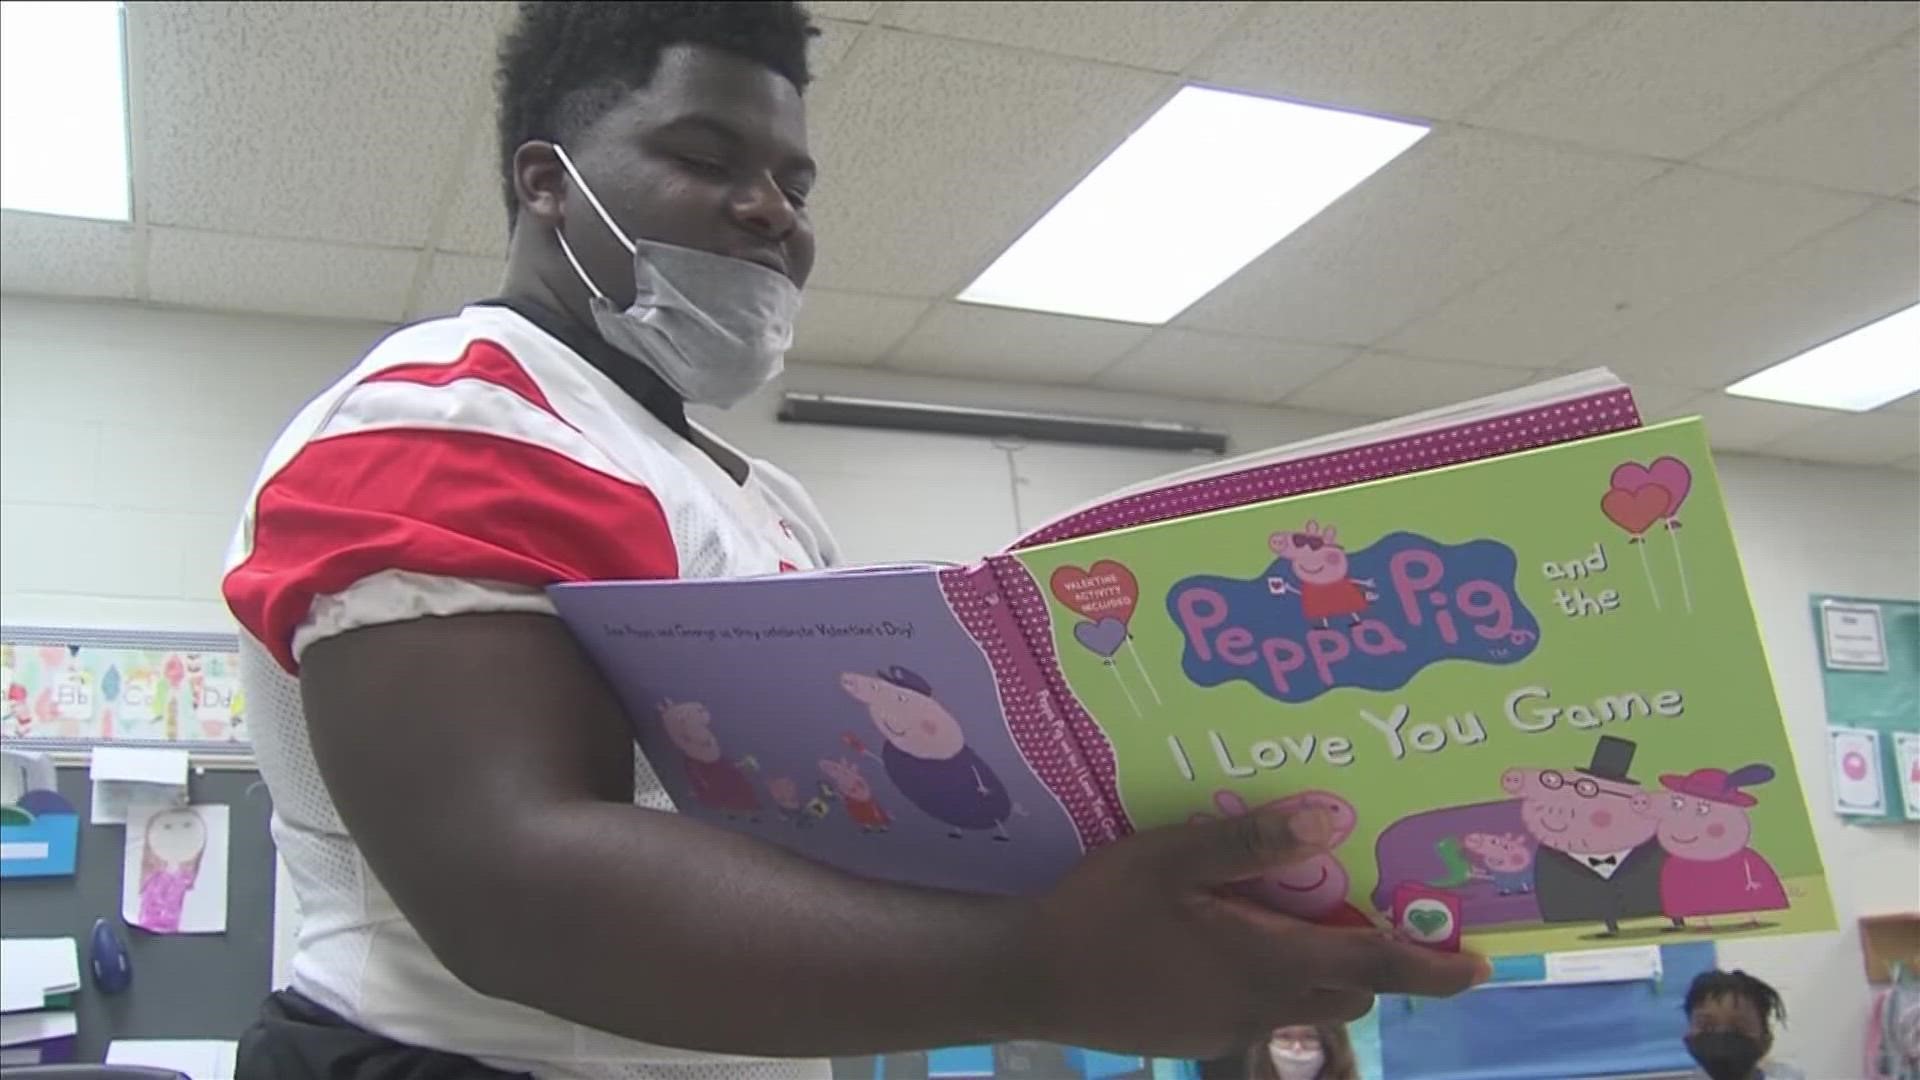 Germantown High School football players, including former player Kody Jones, who now plays for Michigan, read to kids at Germantown Elementary.